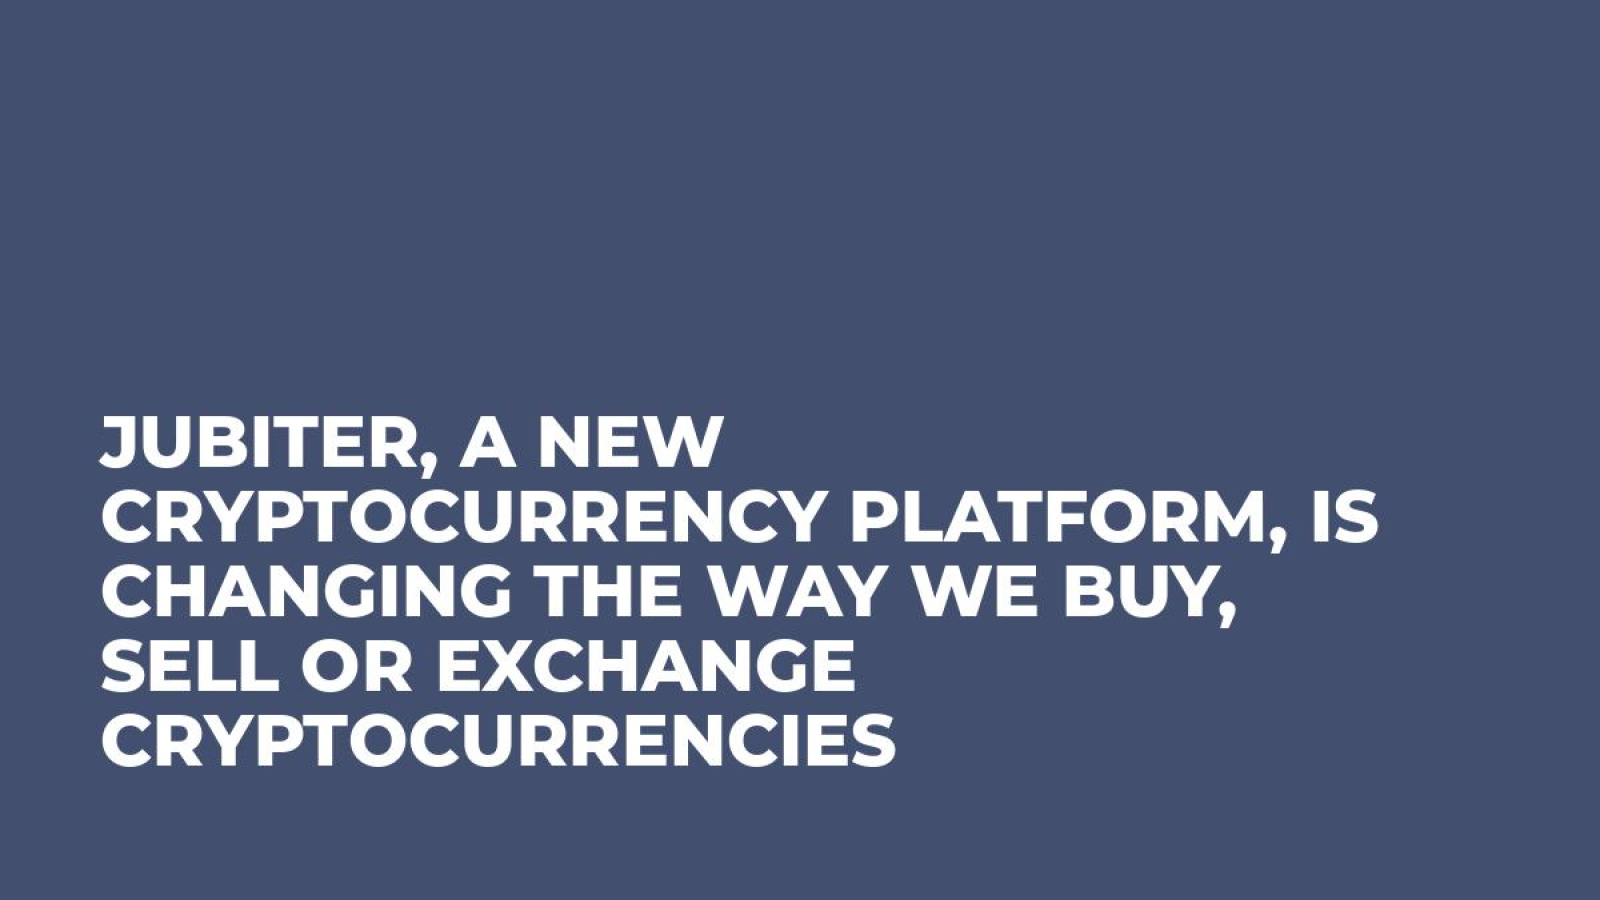 Jubiter, A New Cryptocurrency Platform, is Changing the Way We Buy, Sell or Exchange Cryptocurrencies